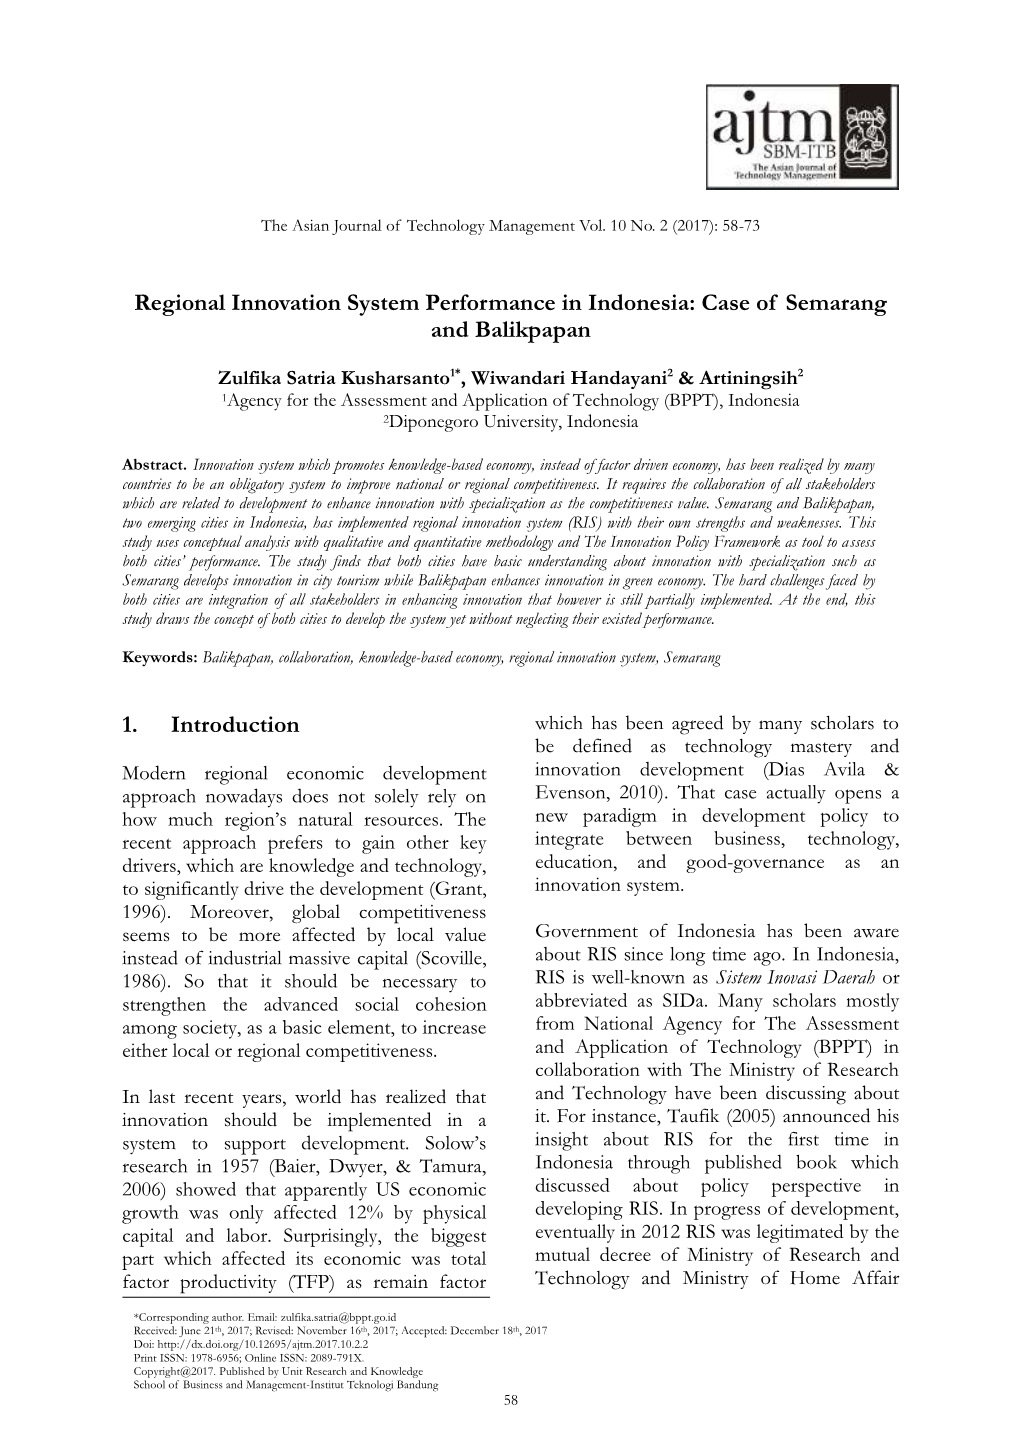 Regional Innovation System Performance in Indonesia: Case of Semarang and Balikpapan